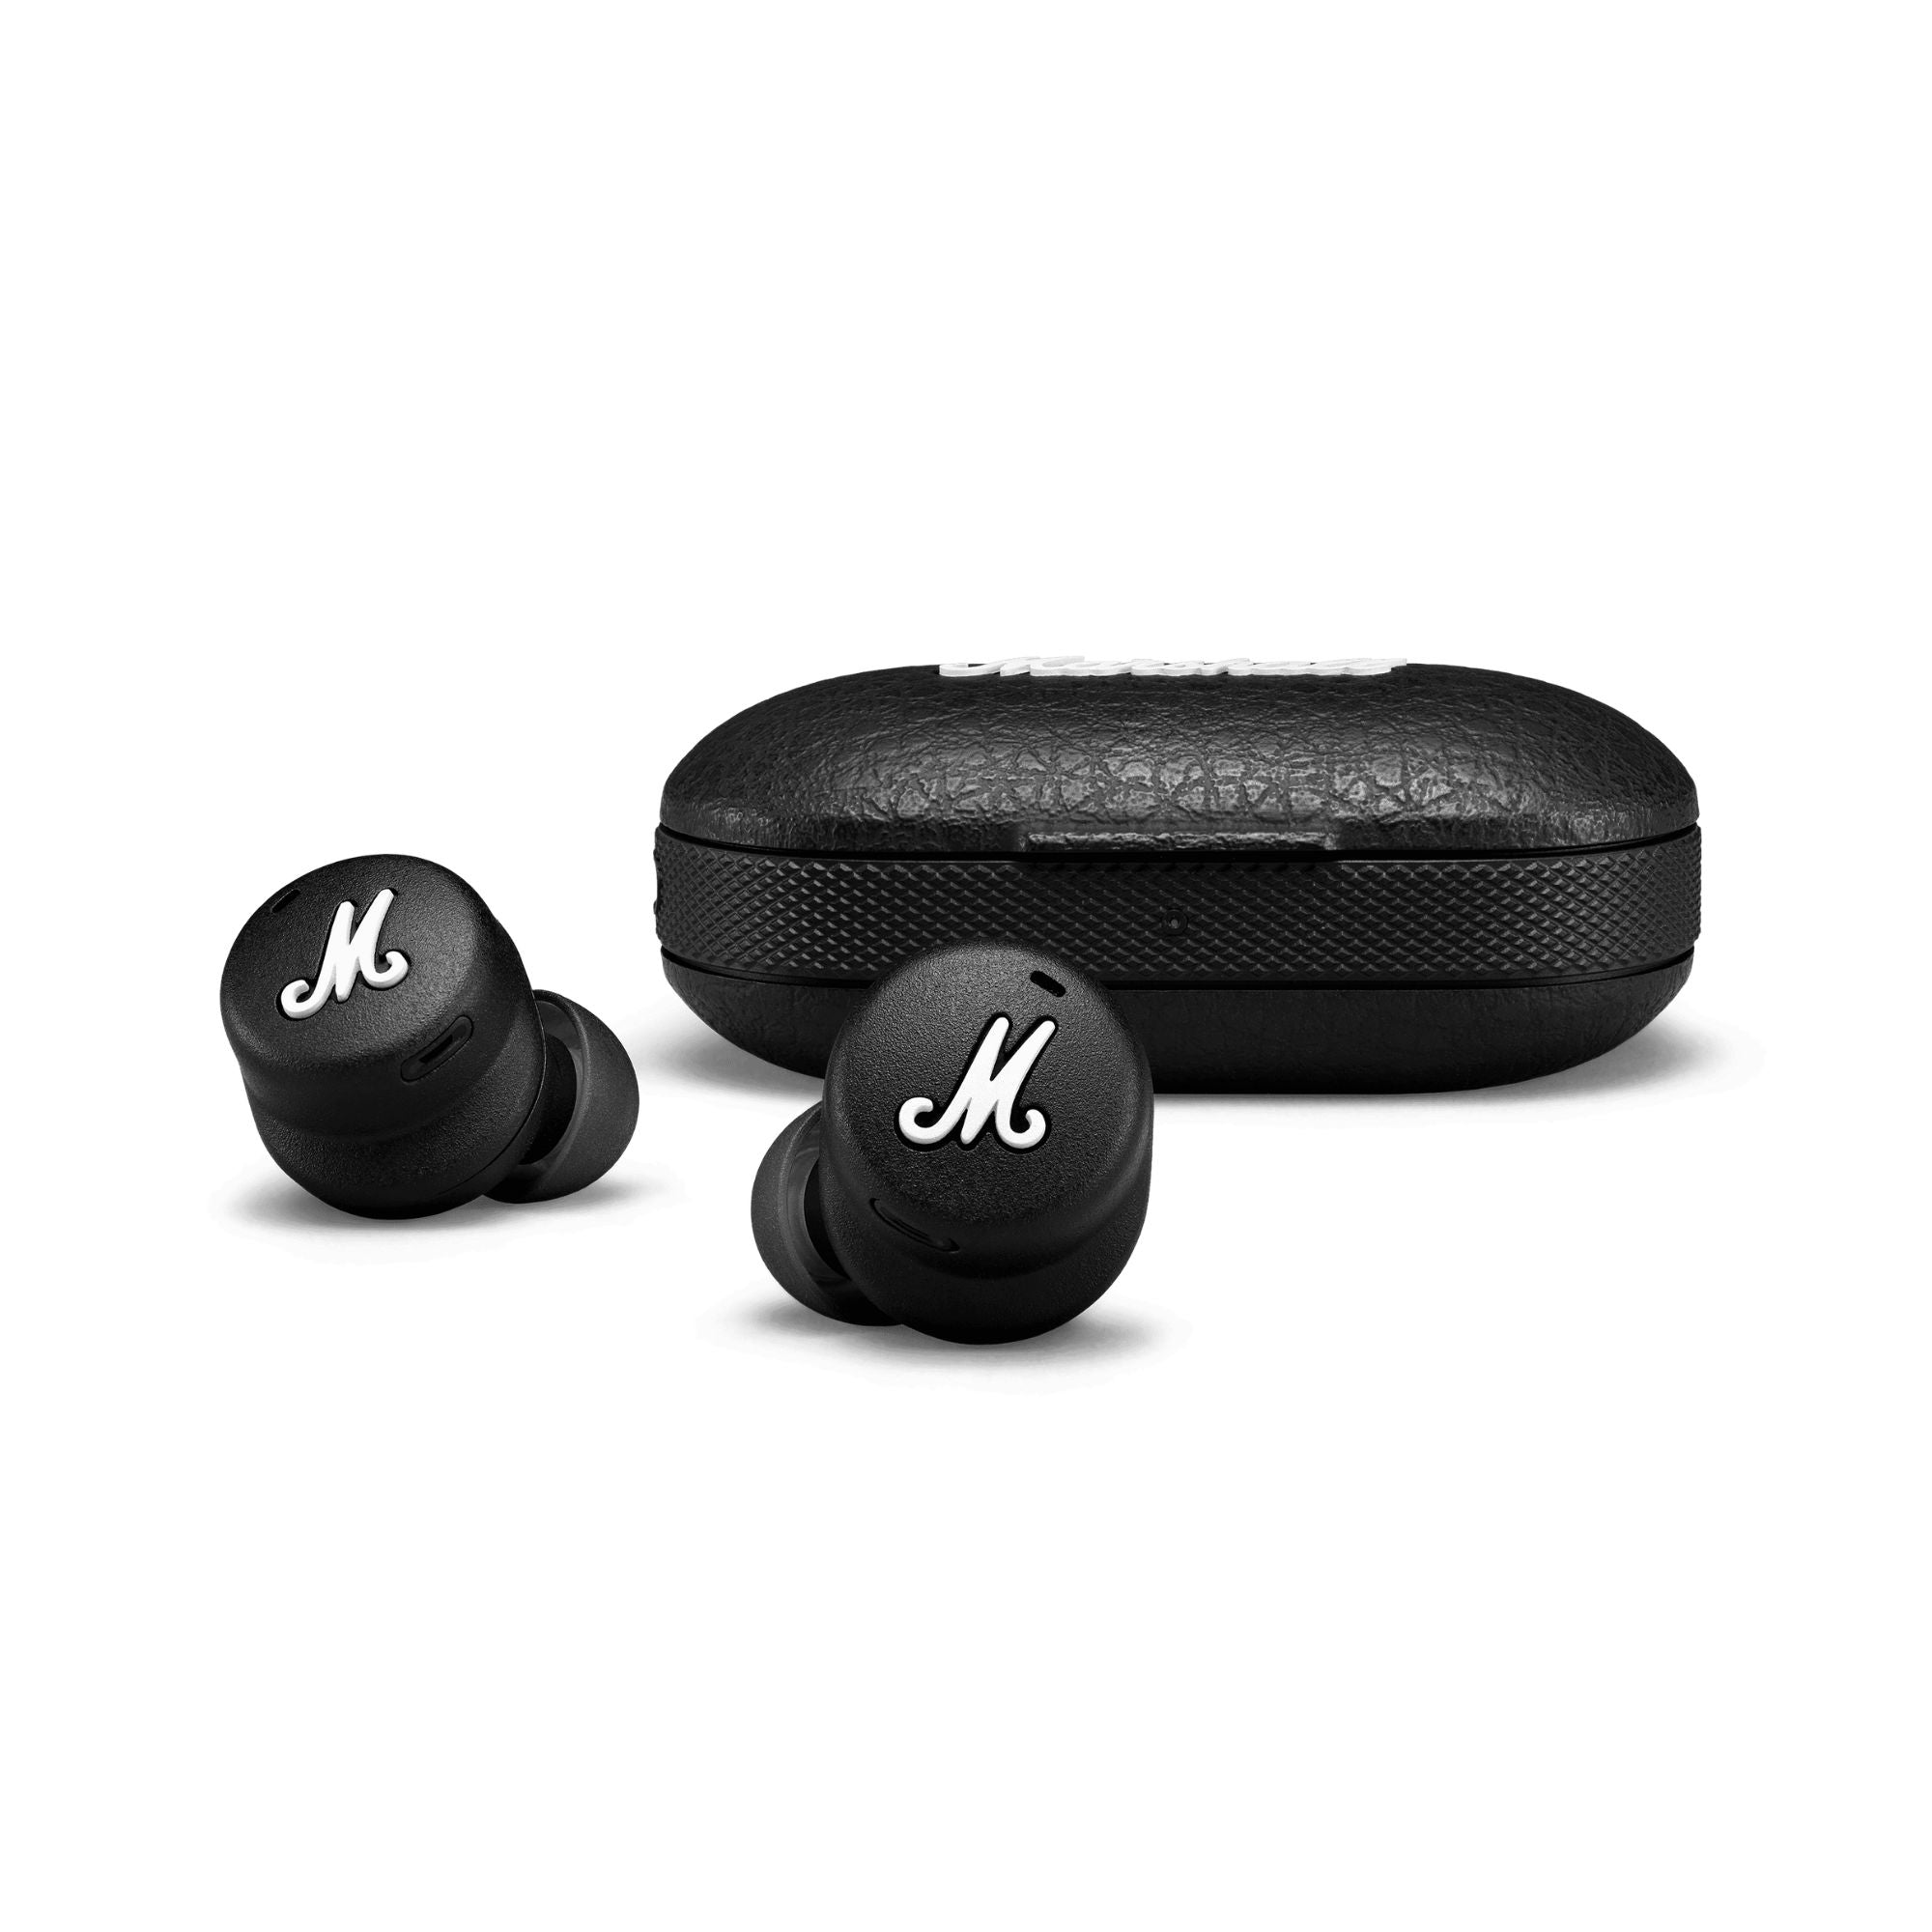 Marshall Mode II - True Wireless, Built For Loud With 25 Hours Of Wireless Playtime, Marshall, Headphones - AVStore.in